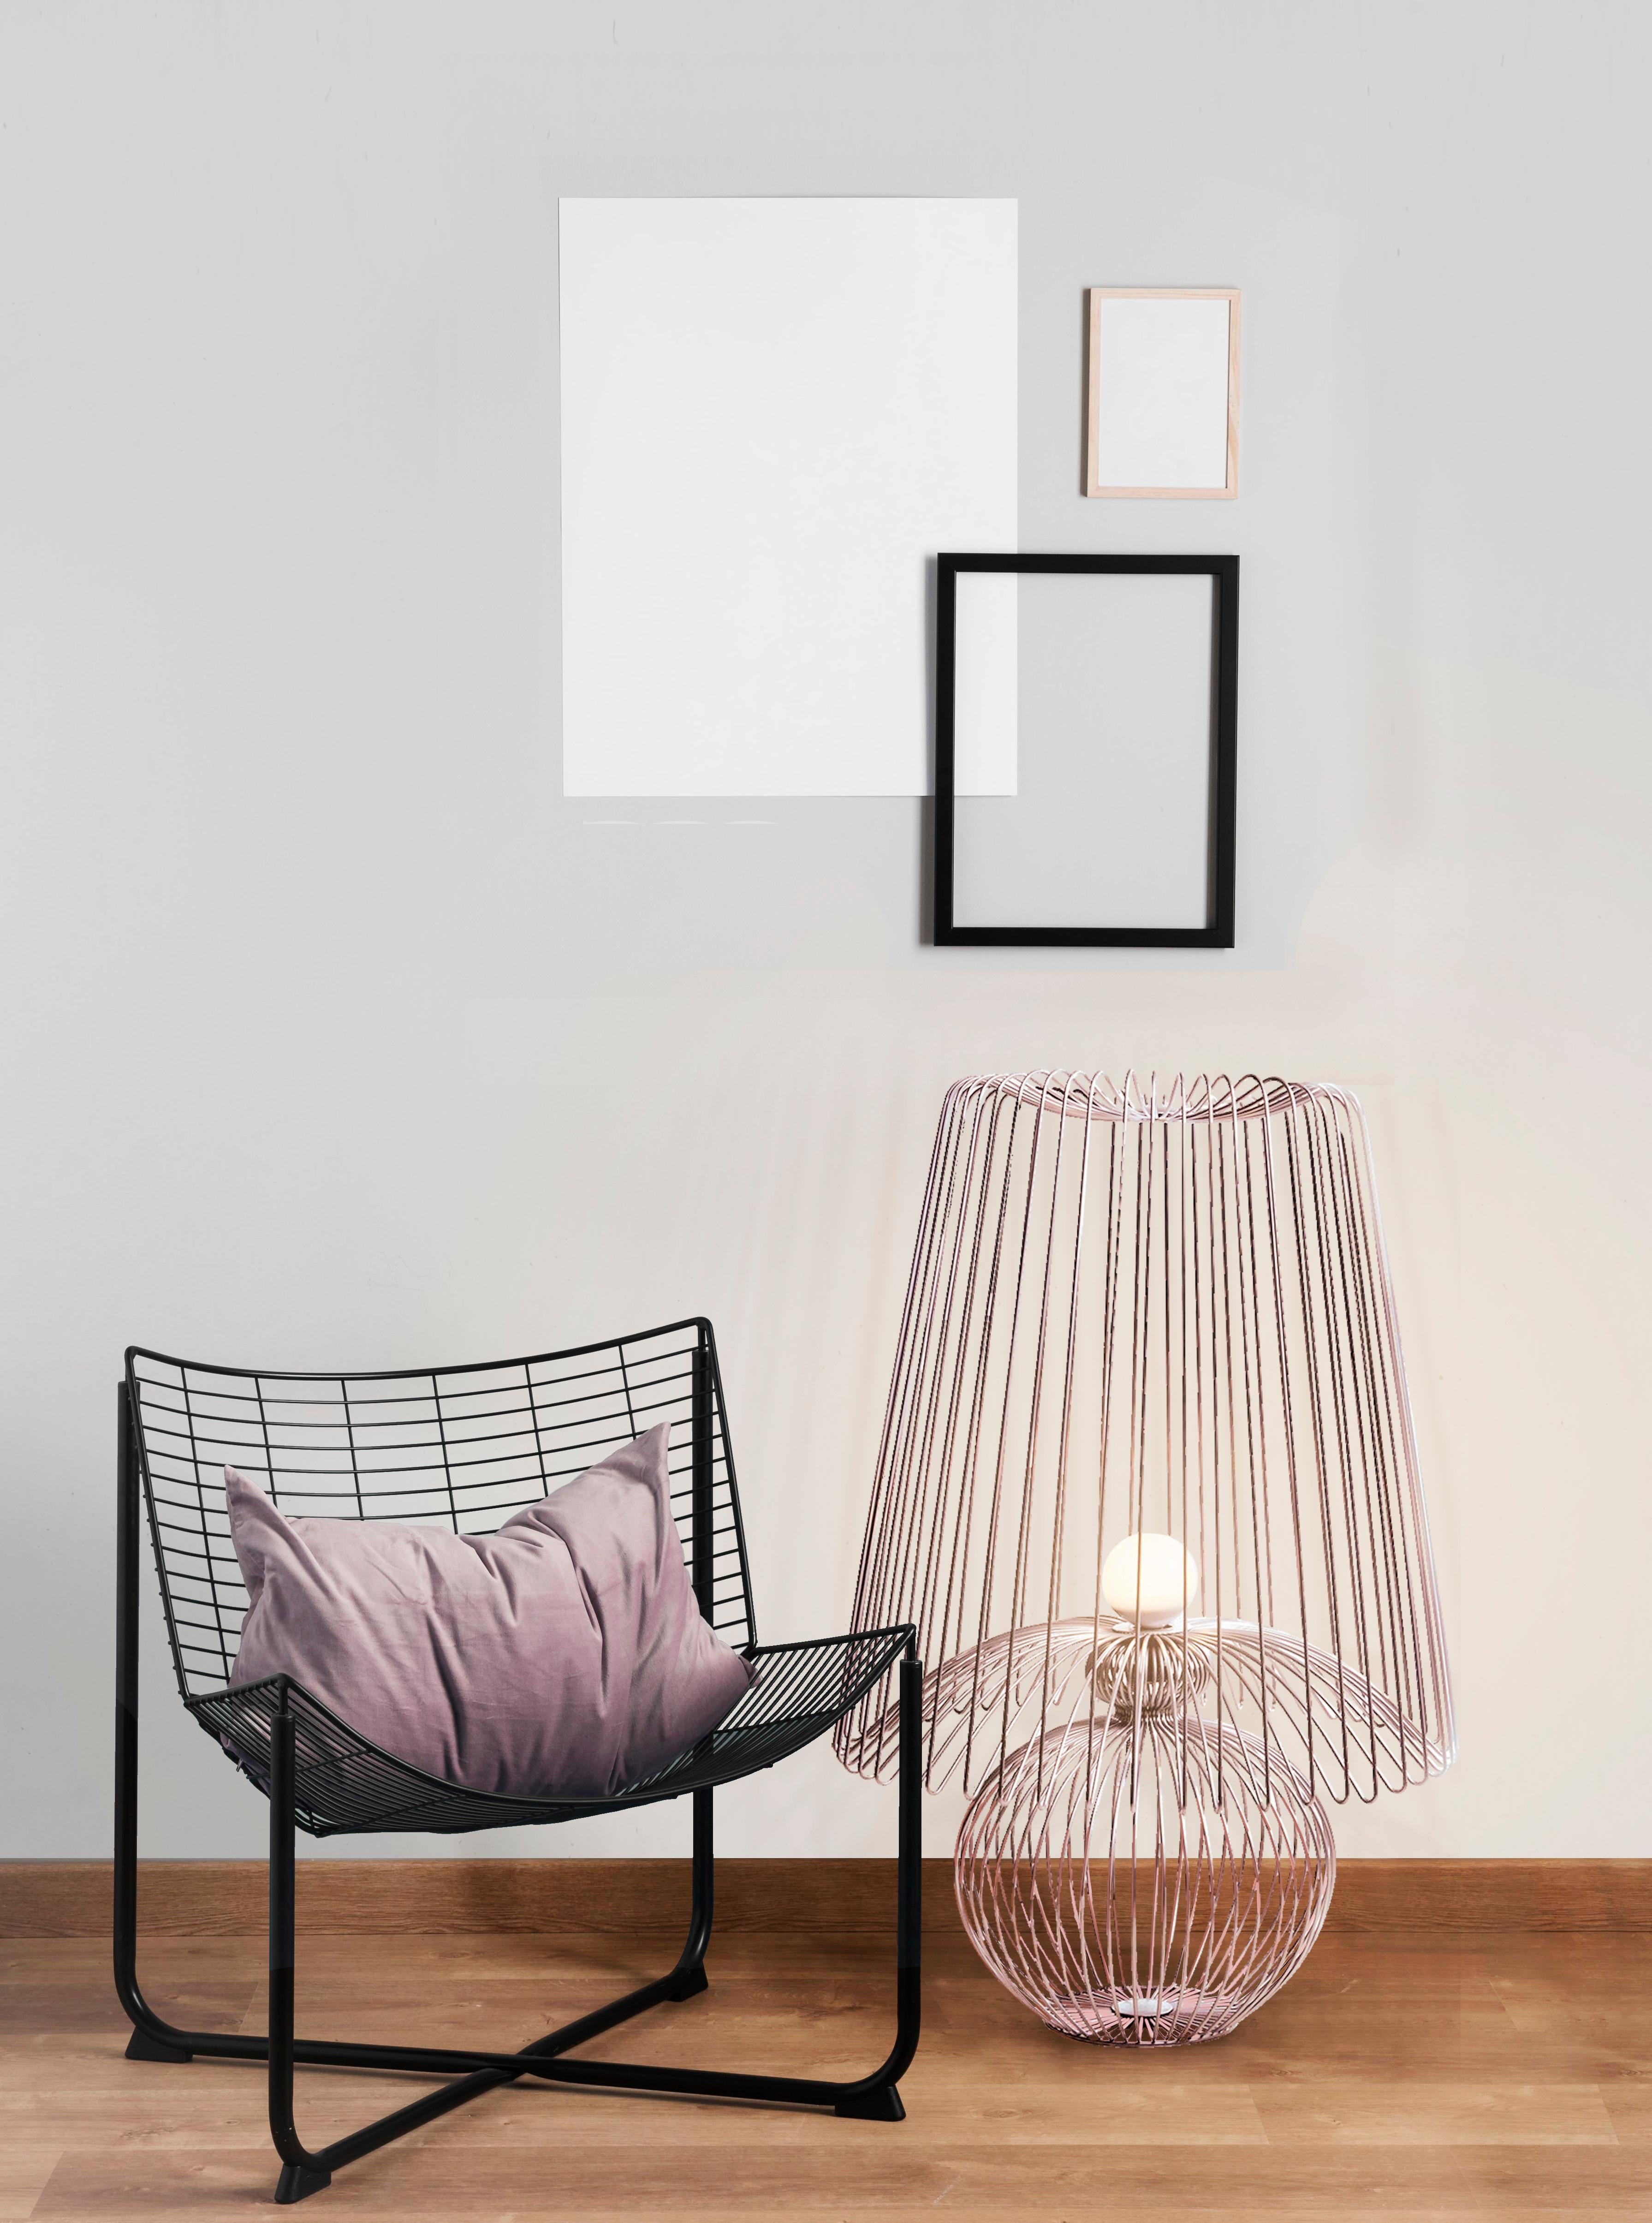 Achieving perfect harmony between light and transparency, the Koy Floor Lamp is a handmade wired piece that may either be used for lighting or as a contemporary decorative item and statement lamp. With its distinctive design derived from rounded